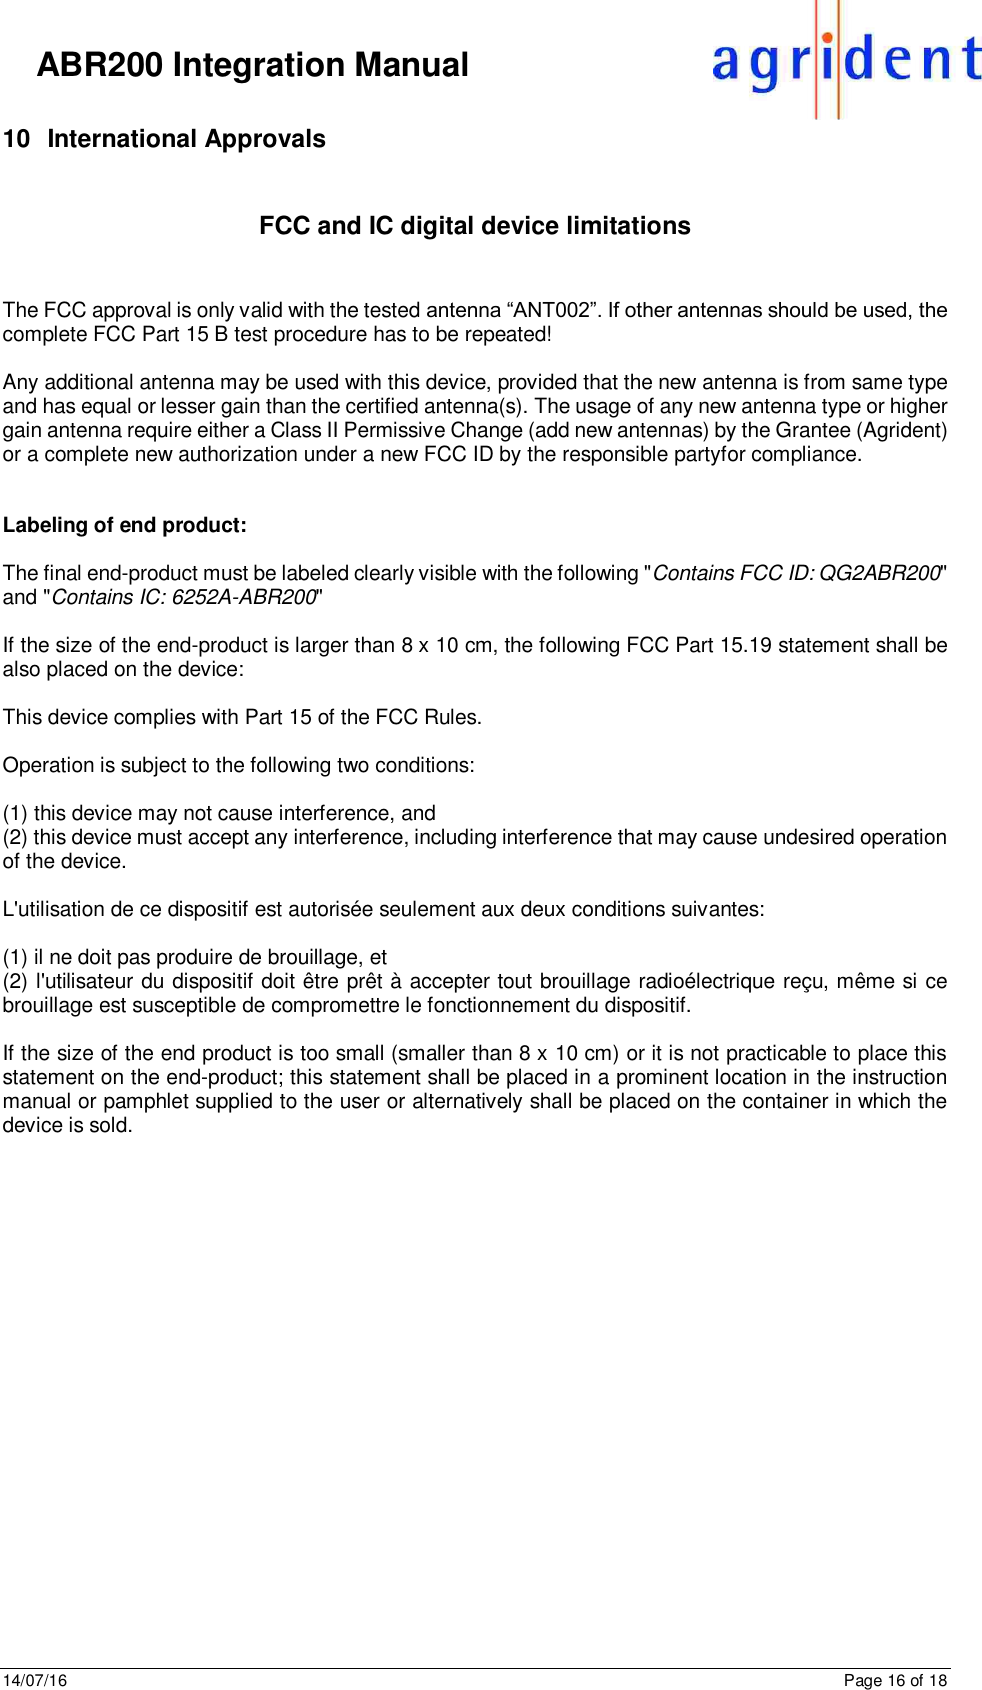 14/07/16      Page 16 of 18      ABR200 Integration Manual 10  International Approvals  FCC and IC digital device limitations   The FCC approval is only valid with the tested antenna “ANT002”. If other antennas should be used, the complete FCC Part 15 B test procedure has to be repeated!  Any additional antenna may be used with this device, provided that the new antenna is from same type and has equal or lesser gain than the certified antenna(s). The usage of any new antenna type or higher gain antenna require either a Class II Permissive Change (add new antennas) by the Grantee (Agrident) or a complete new authorization under a new FCC ID by the responsible partyfor compliance.   Labeling of end product:  The final end-product must be labeled clearly visible with the following &quot;Contains FCC ID: QG2ABR200&quot; and &quot;Contains IC: 6252A-ABR200&quot;  If the size of the end-product is larger than 8 x 10 cm, the following FCC Part 15.19 statement shall be also placed on the device:  This device complies with Part 15 of the FCC Rules.   Operation is subject to the following two conditions:  (1) this device may not cause interference, and (2) this device must accept any interference, including interference that may cause undesired operation of the device.   L&apos;utilisation de ce dispositif est autorisée seulement aux deux conditions suivantes:  (1) il ne doit pas produire de brouillage, et (2) l&apos;utilisateur du dispositif doit être prêt à accepter tout brouillage radioélectrique reçu, même si ce brouillage est susceptible de compromettre le fonctionnement du dispositif.  If the size of the end product is too small (smaller than 8 x 10 cm) or it is not practicable to place this statement on the end-product; this statement shall be placed in a prominent location in the instruction manual or pamphlet supplied to the user or alternatively shall be placed on the container in which the device is sold.       